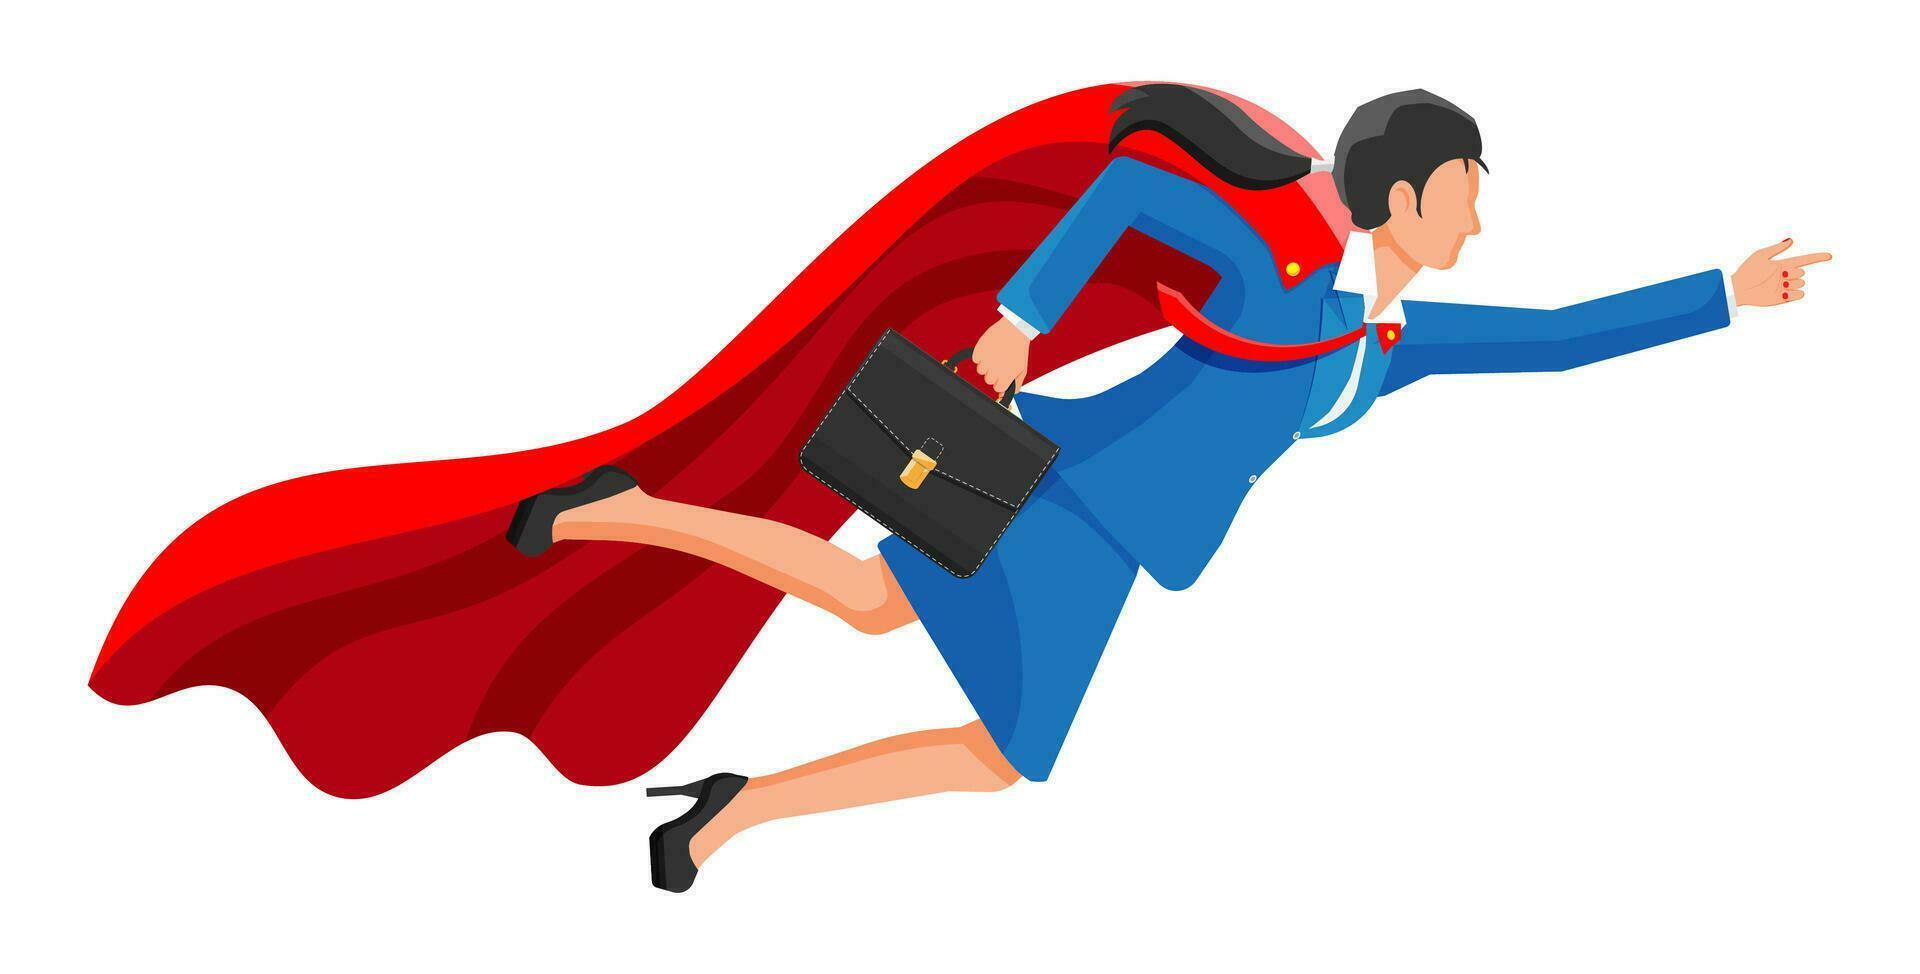 Superhero businesswoman flying in sky. Business woman in suit and red cloak. Goal setting. Smart goal. Business target concept. Achievement and success. Vector illustration in flat style